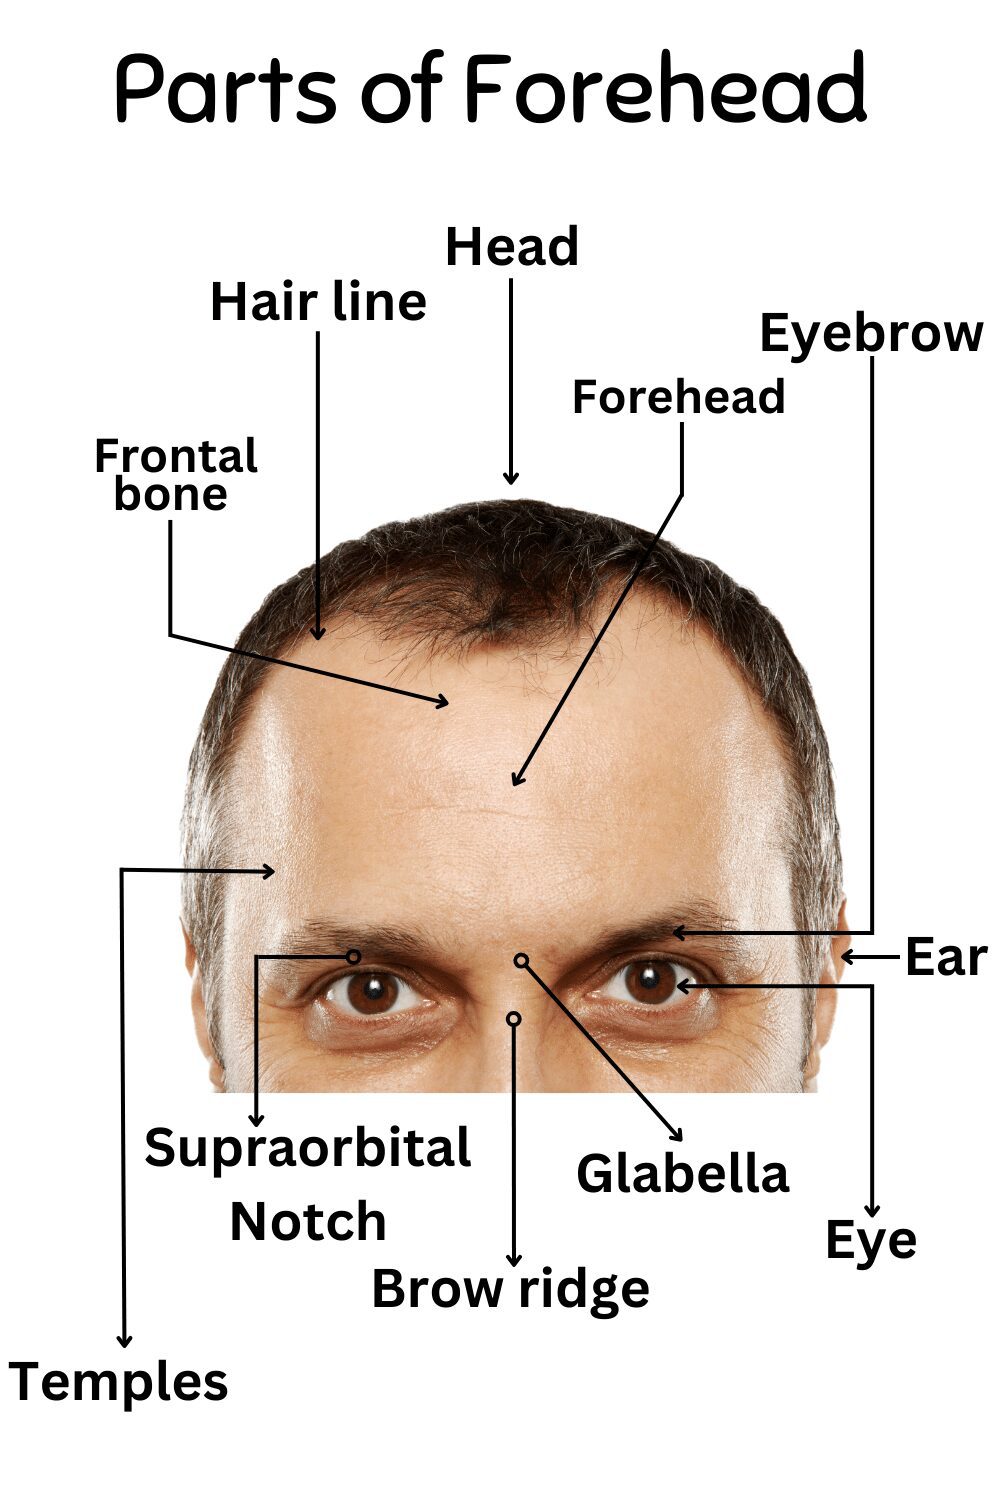 Parts of Forehead with Their Functions